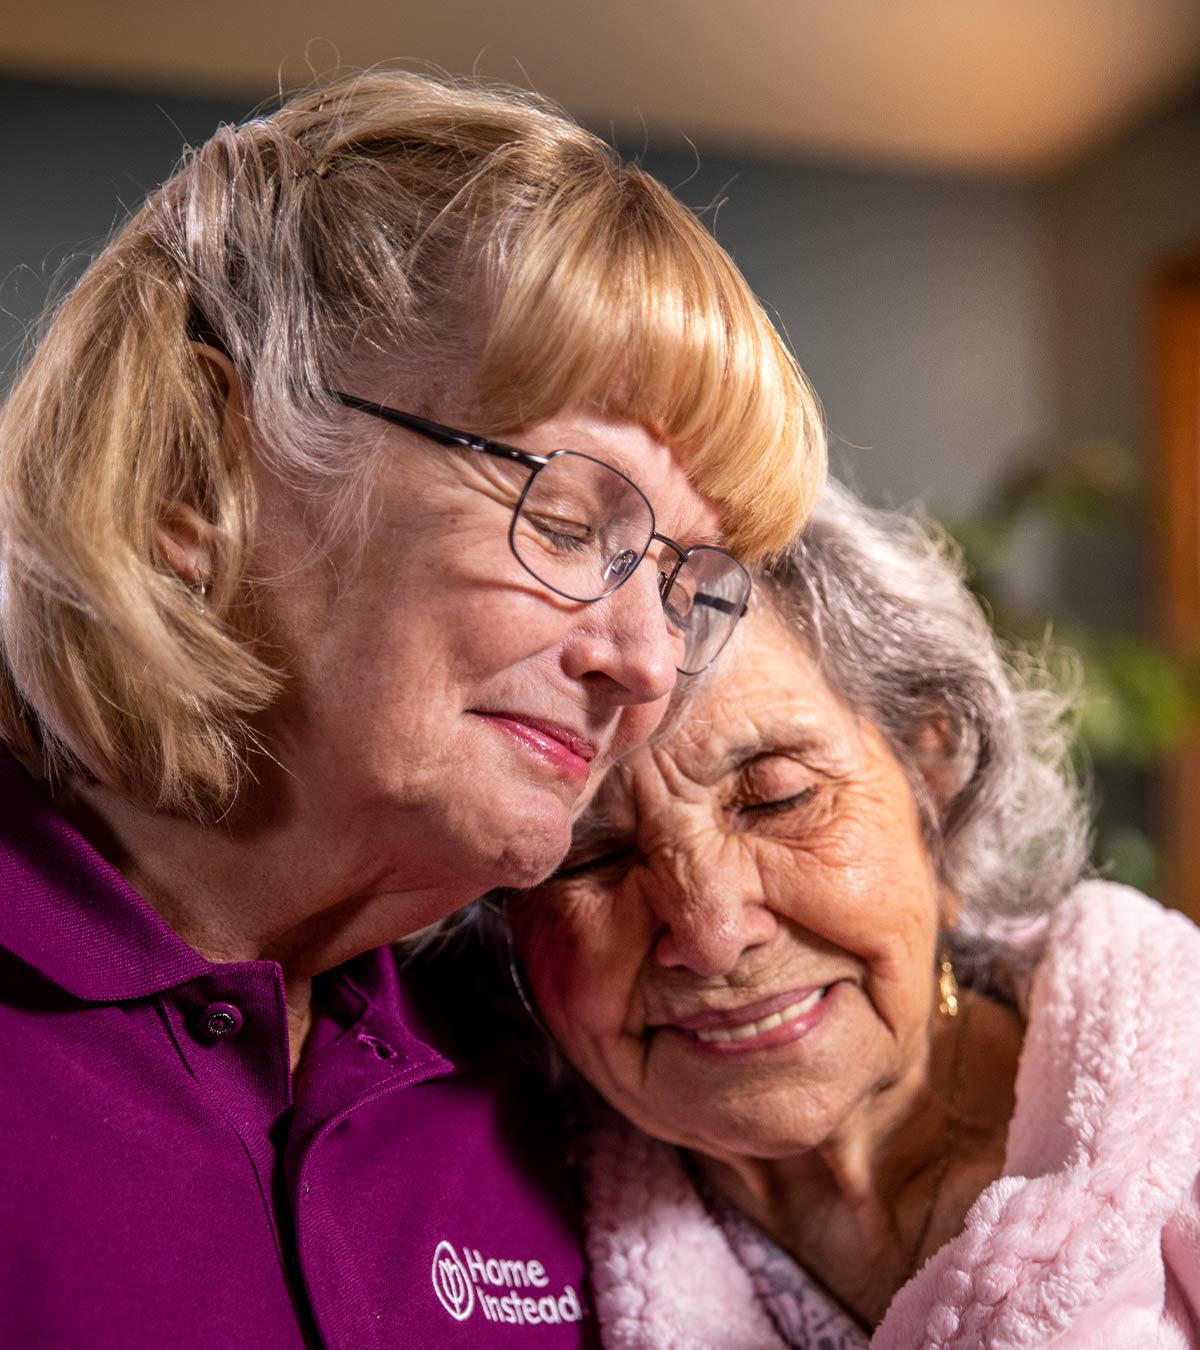 CAREGiver providing in-home senior care services. Home Instead of Towson, MD provides Elder Care to aging adults. 